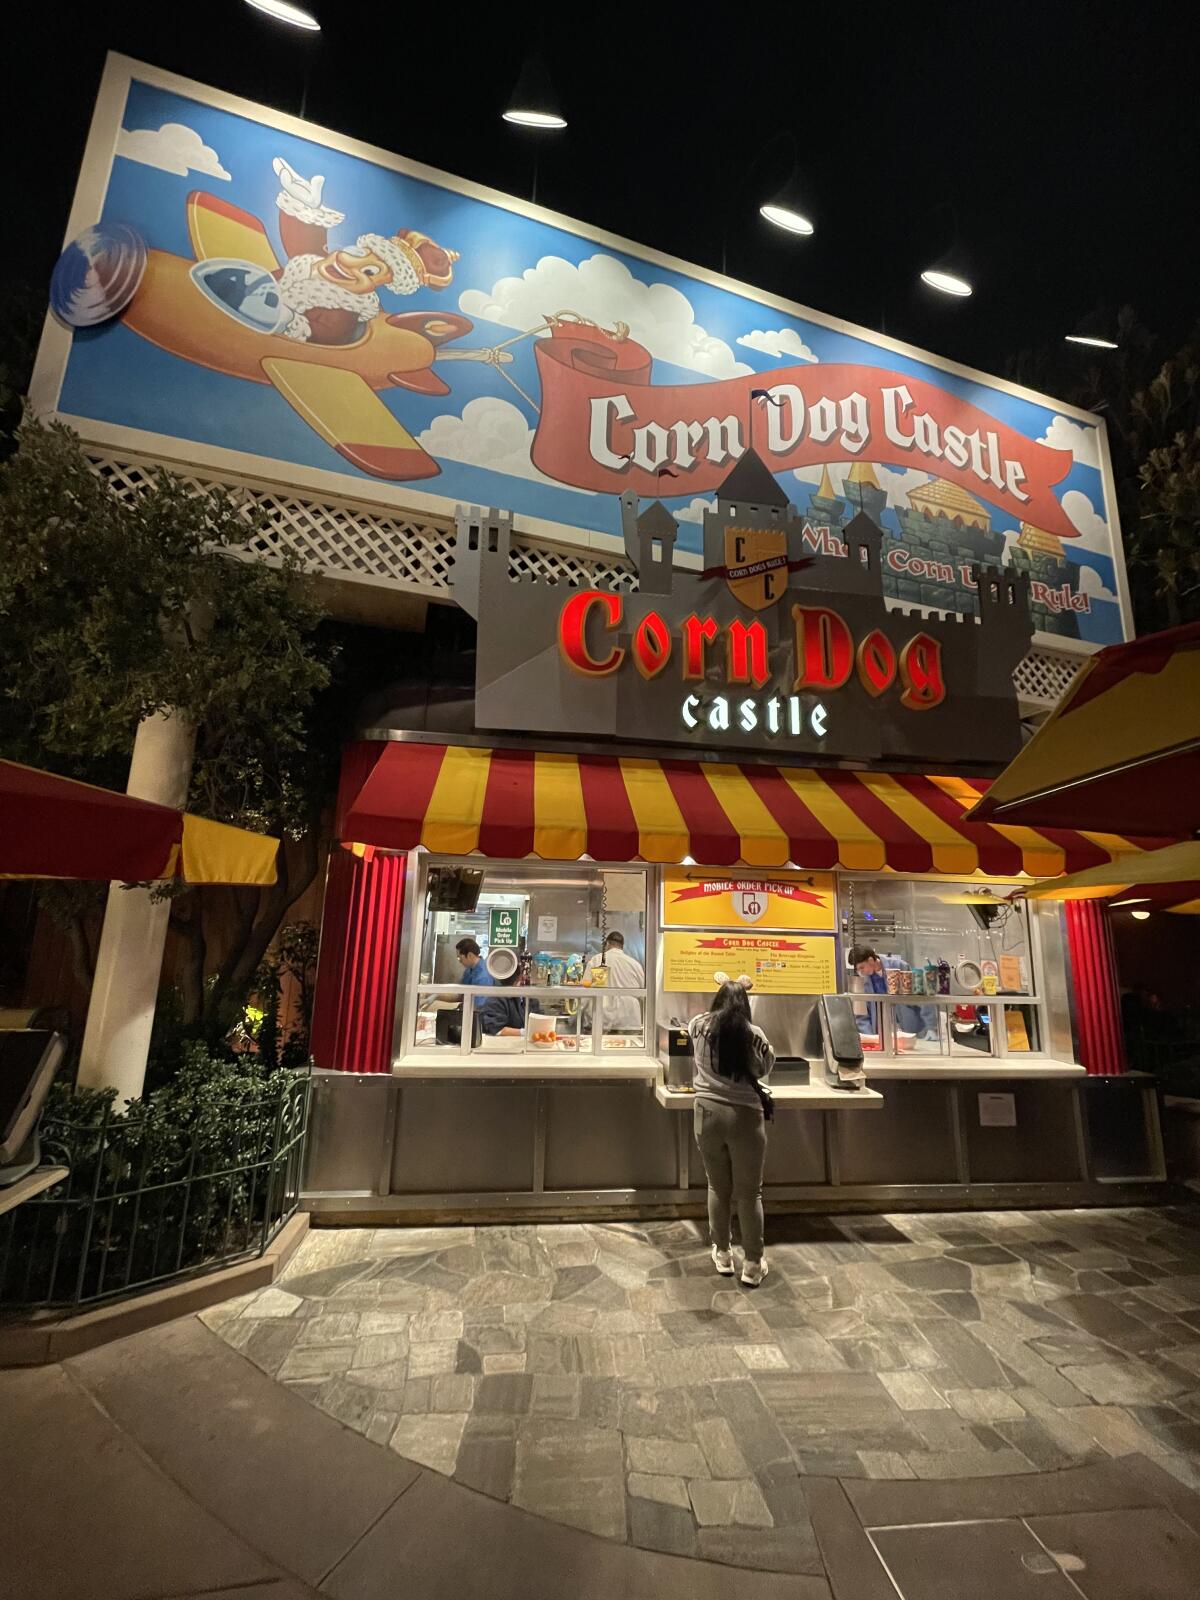 For a mere $10.79, the Hot Link Corn Dog from Corn Dog Castle is just 20 cents more than the original corn dog.